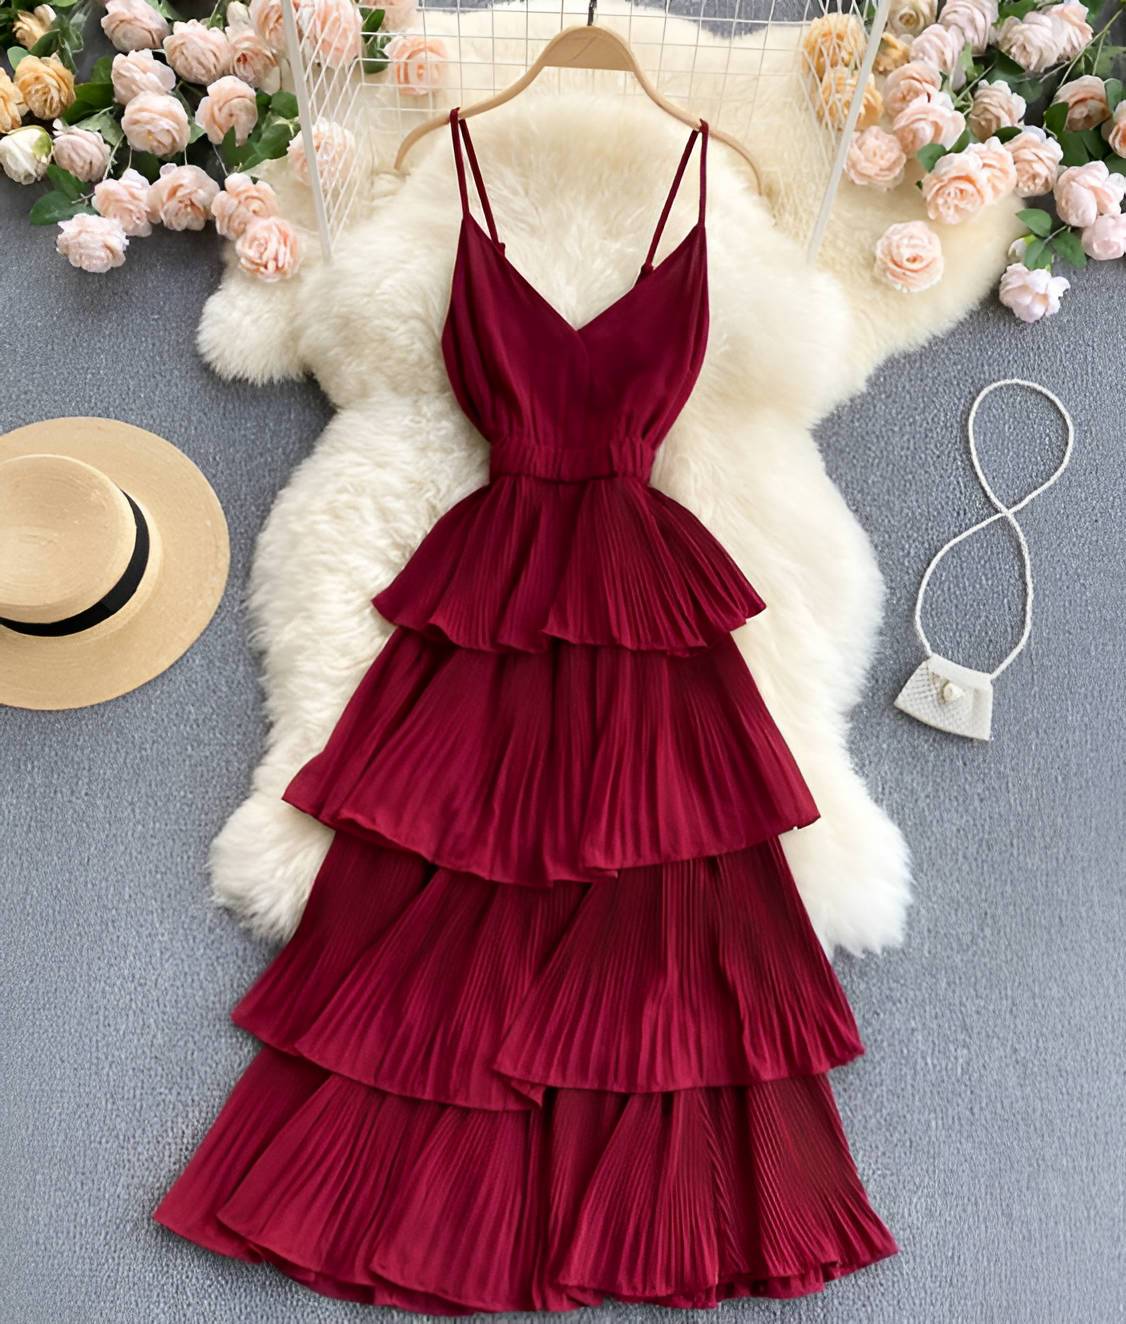 20 Stunning Outfit Ideas To Rock Your Red Dress - 169